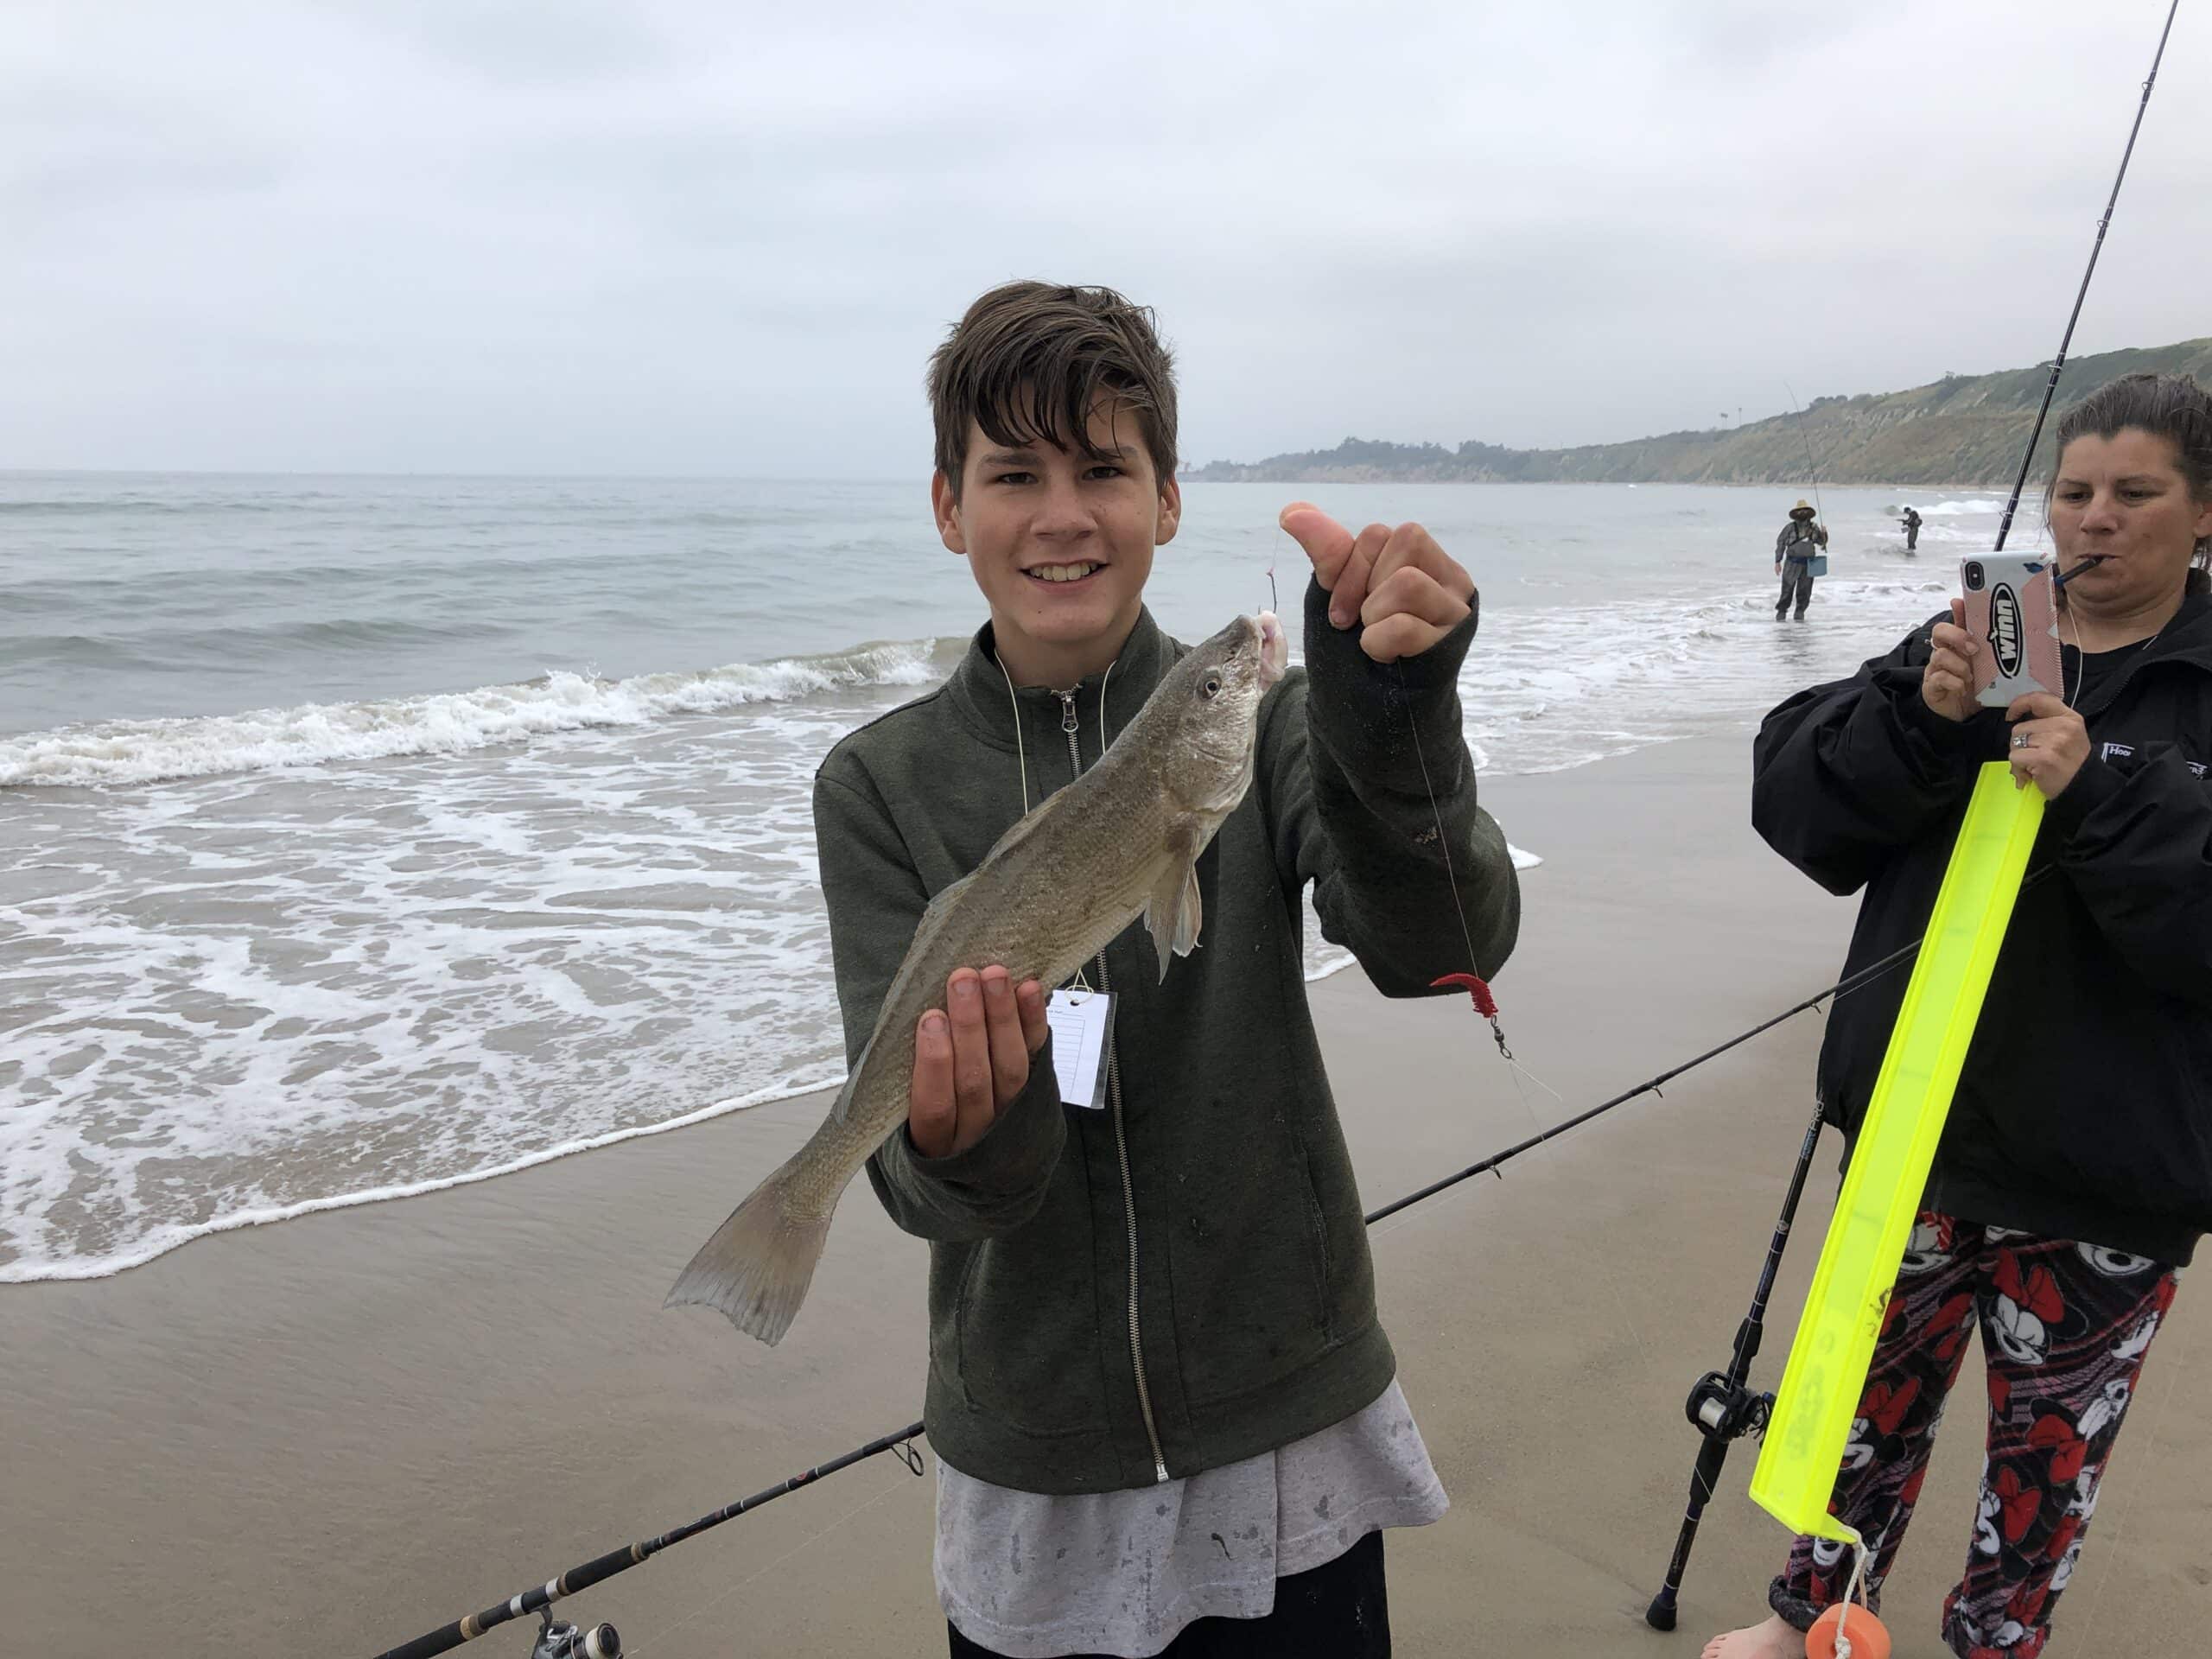 Young Angler Steals The Show At Riptide Rendezvous